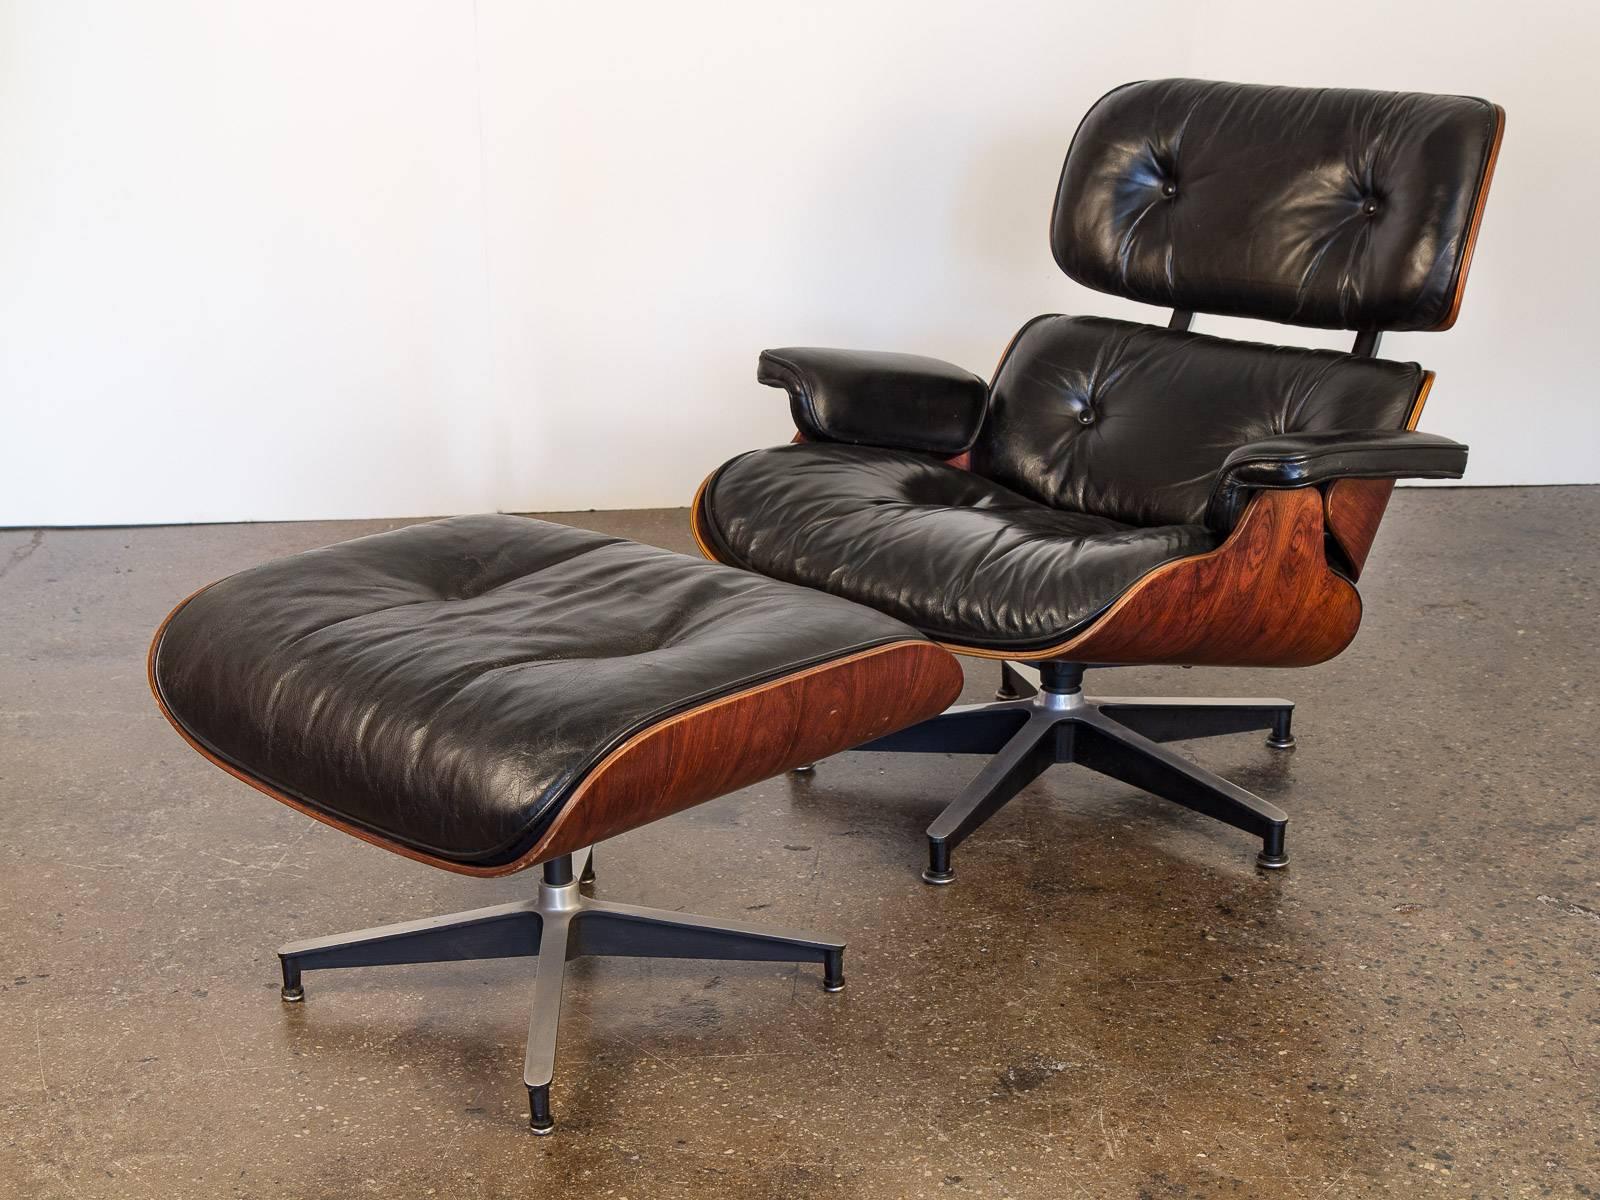 Iconic 670 Lounge Chair and 671 Ottoman designed by Charles and Ray Eames for Herman Miller. Lounge chair has all of its original black leather, with a beautiful patina. Left armrest has seen some wear, nothing unsightly. Both in overall wonderful